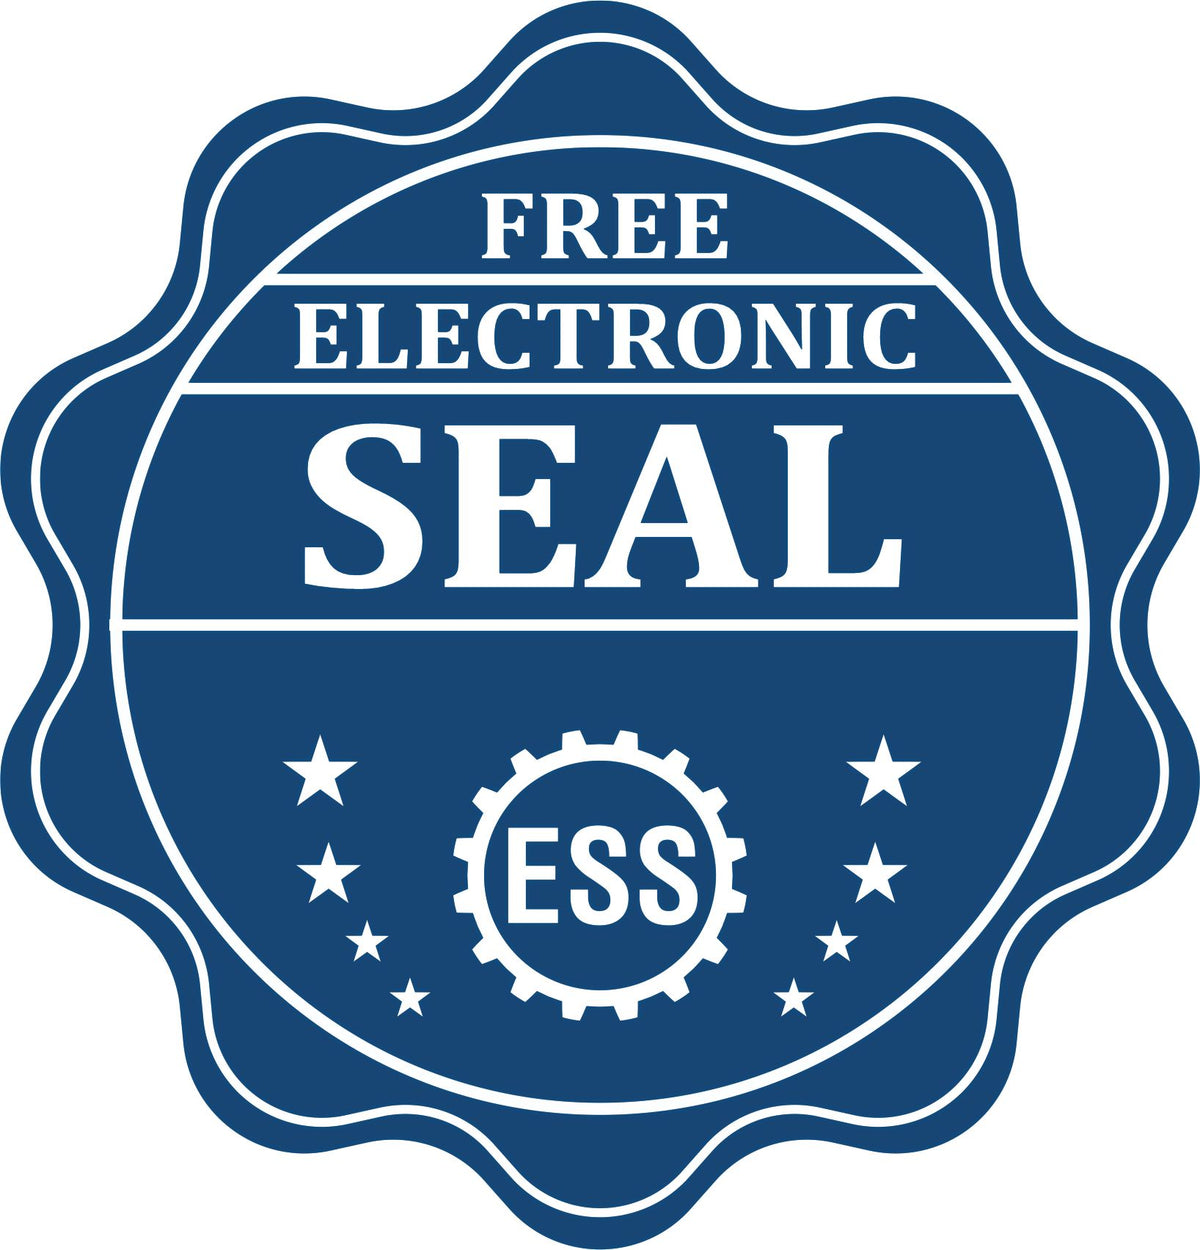 A badge showing a free electronic seal for the Slim Pre-Inked New Jersey Land Surveyor Seal Stamp with stars and the ESS gear on the emblem.